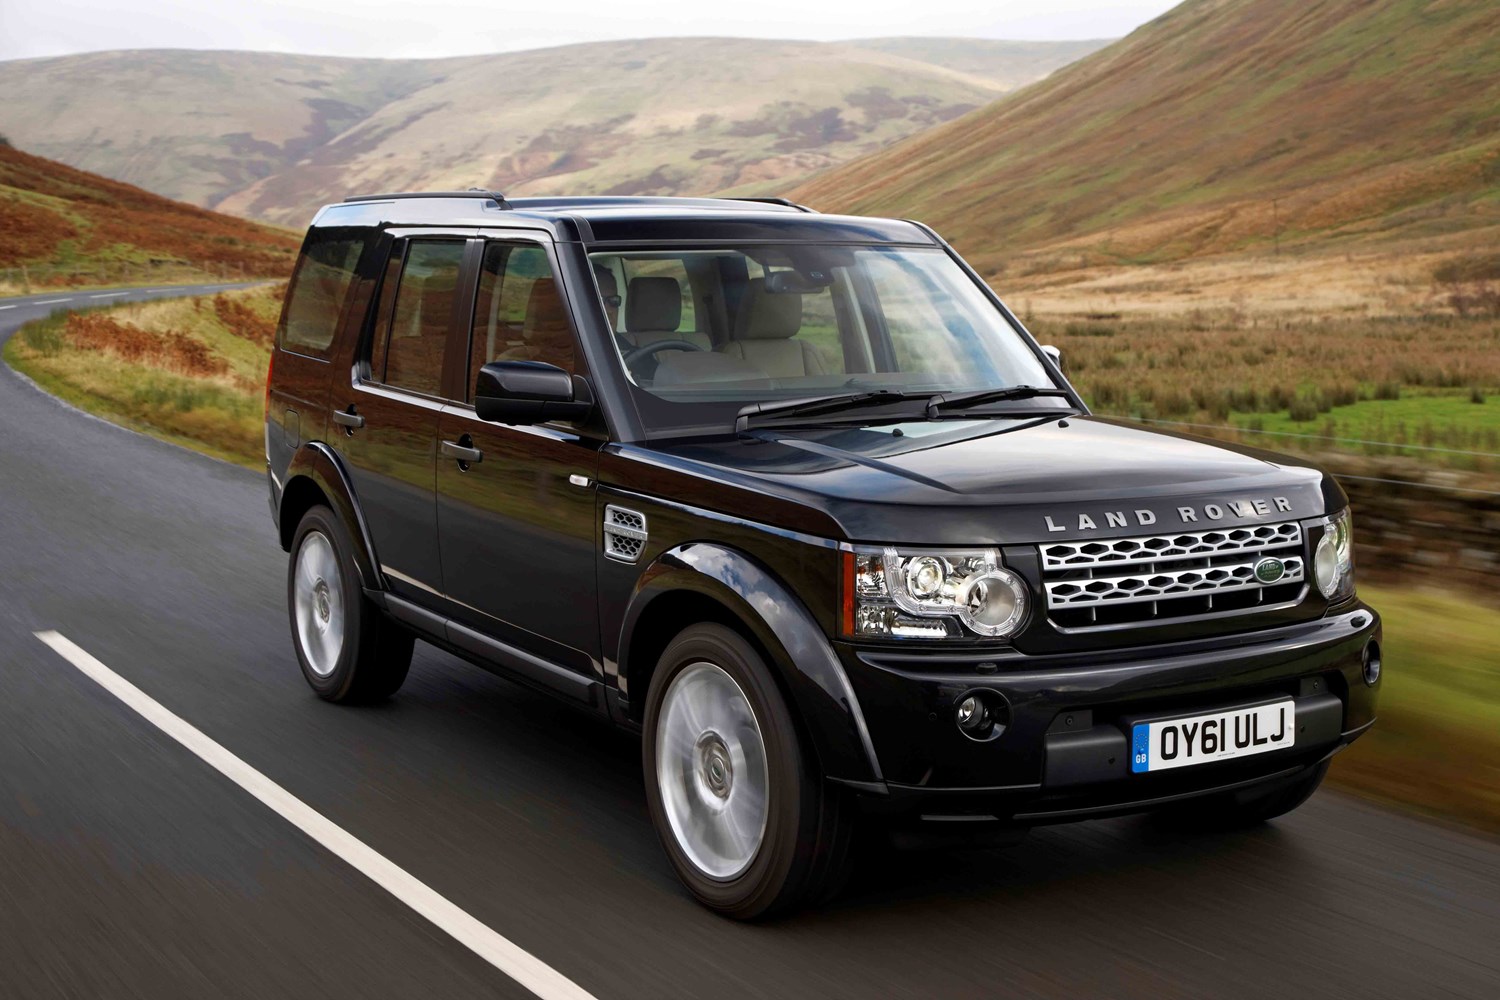 optioneel gids trainer Land Rover Discovery 4 2020 review | Motors.co.uk